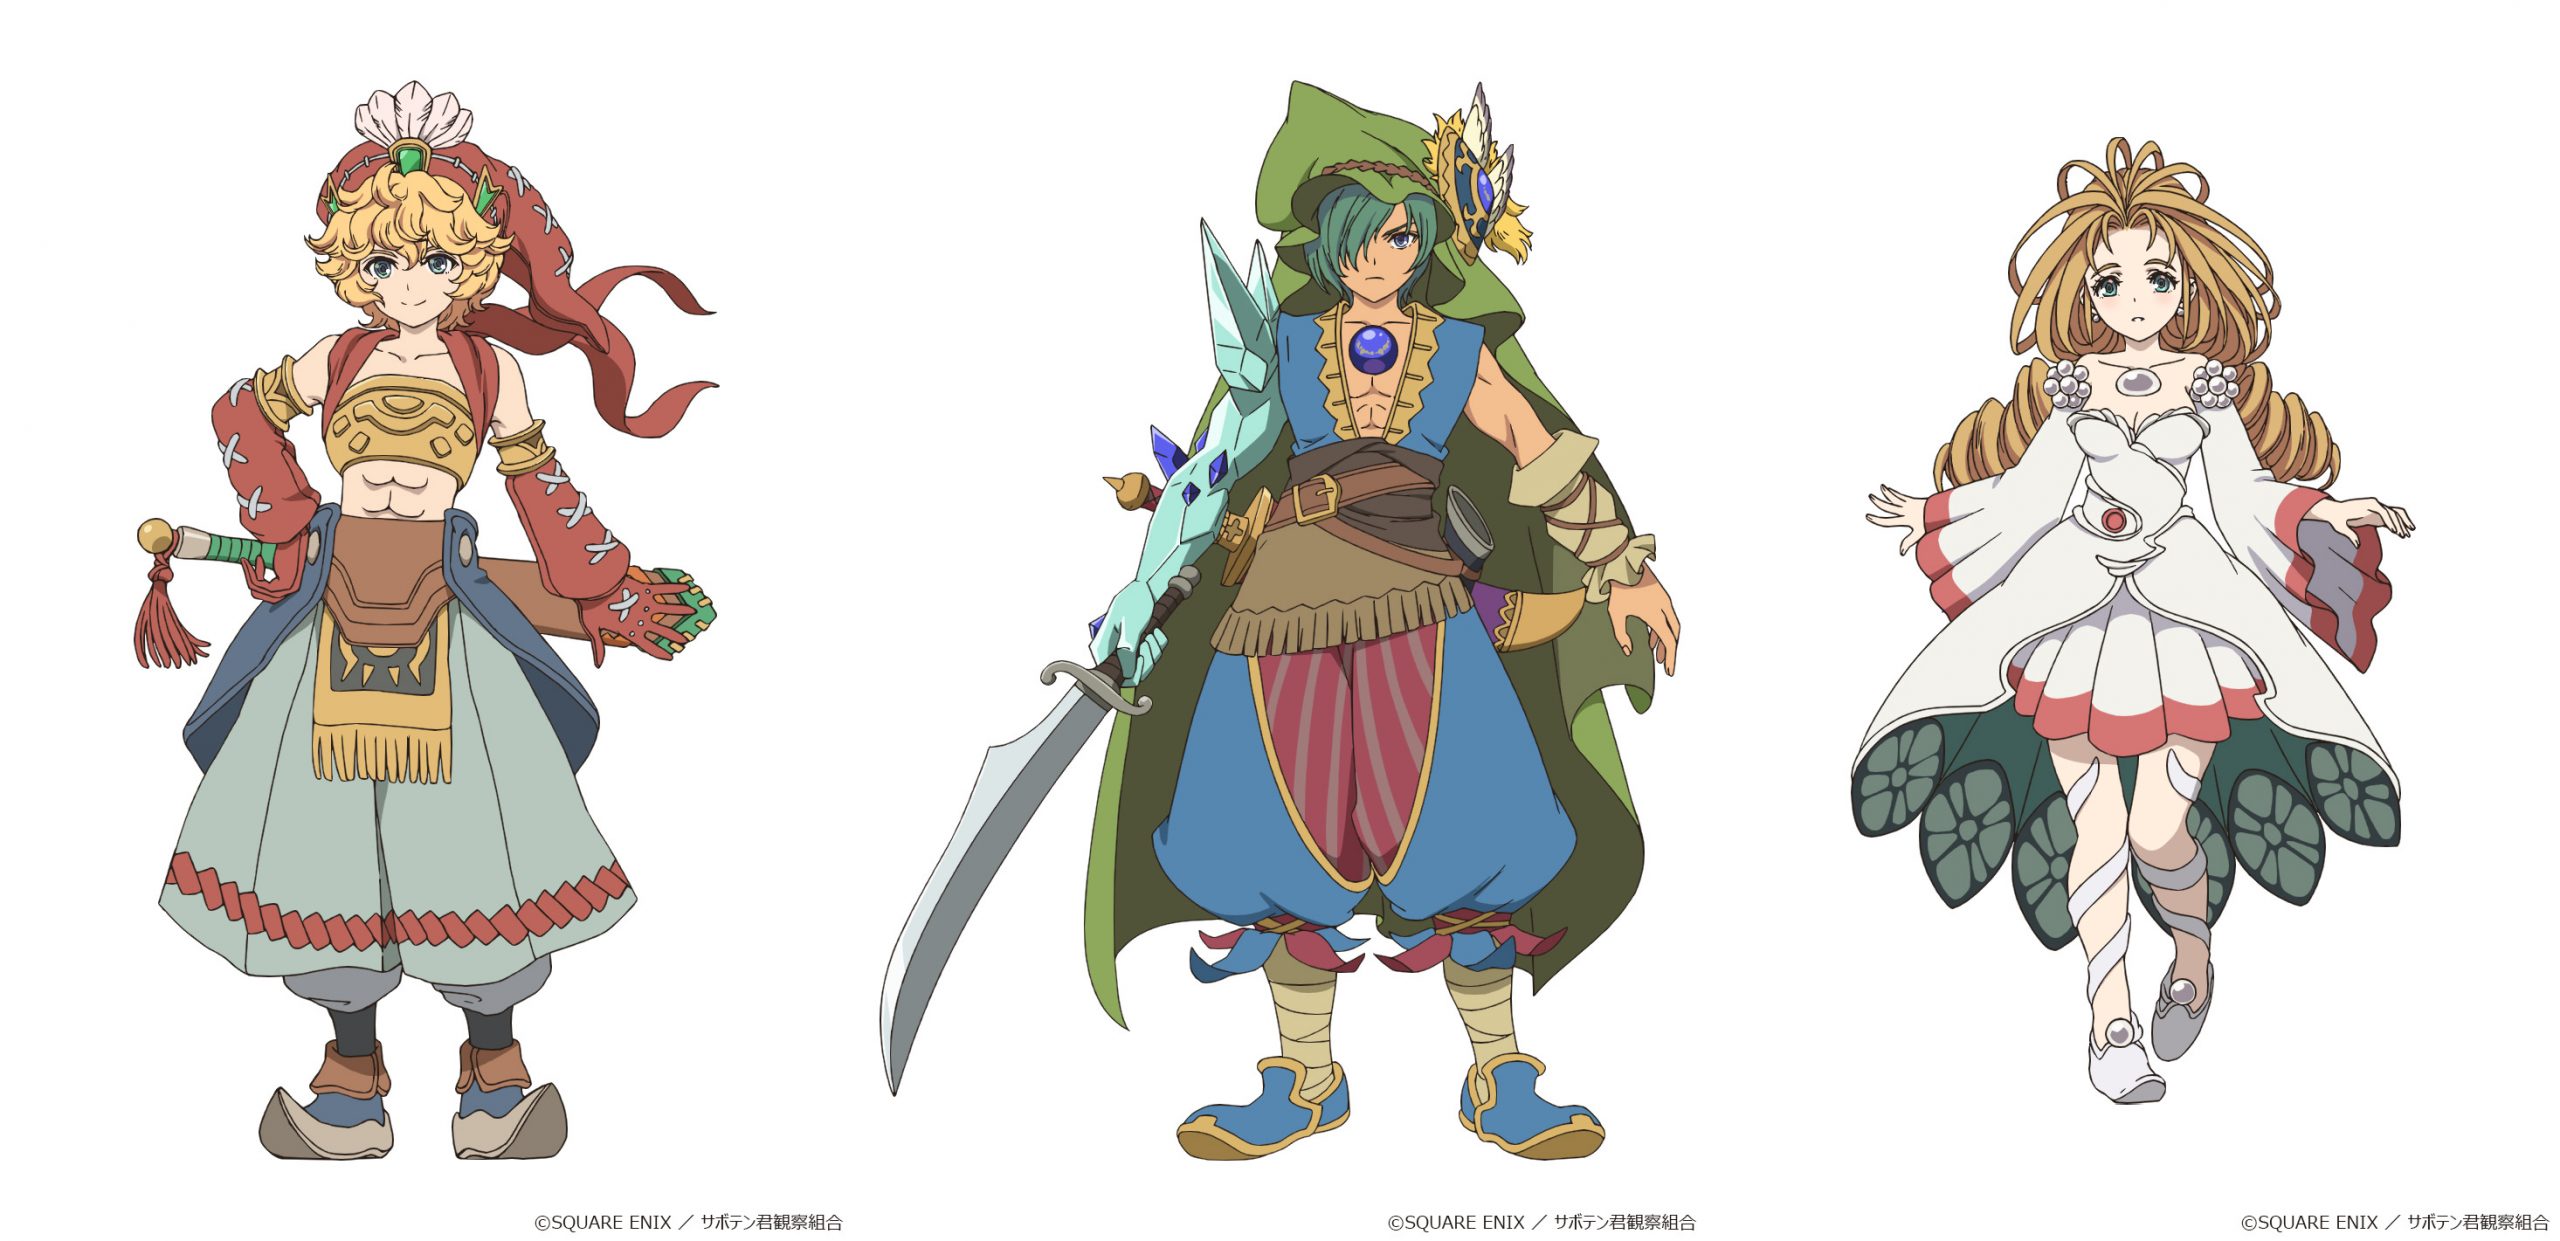 New Mana (Seiken Densetsu) Game in Development for Consoles, Legend of Mana:  The Teardrop Crystal Anime Announced